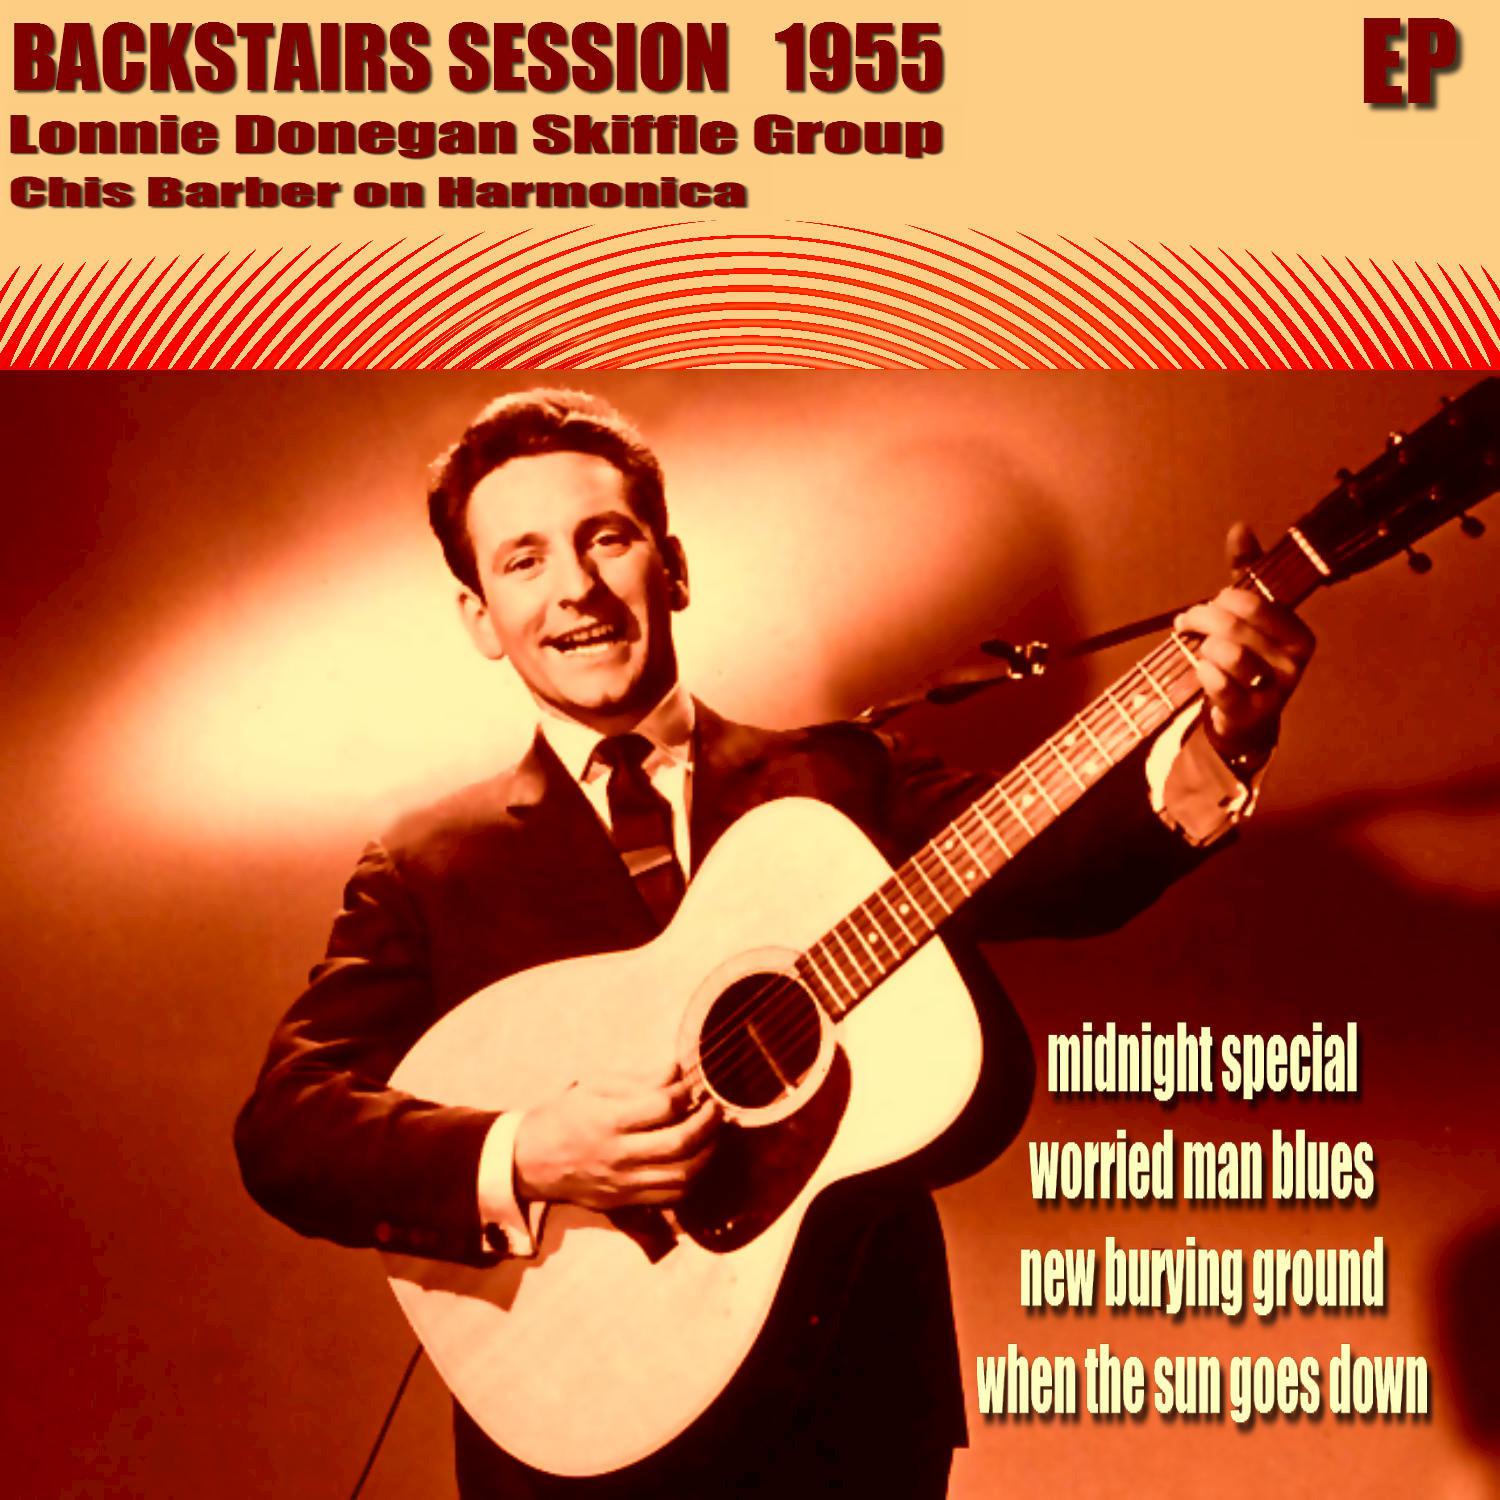 Backstairs Session 1955 - EP